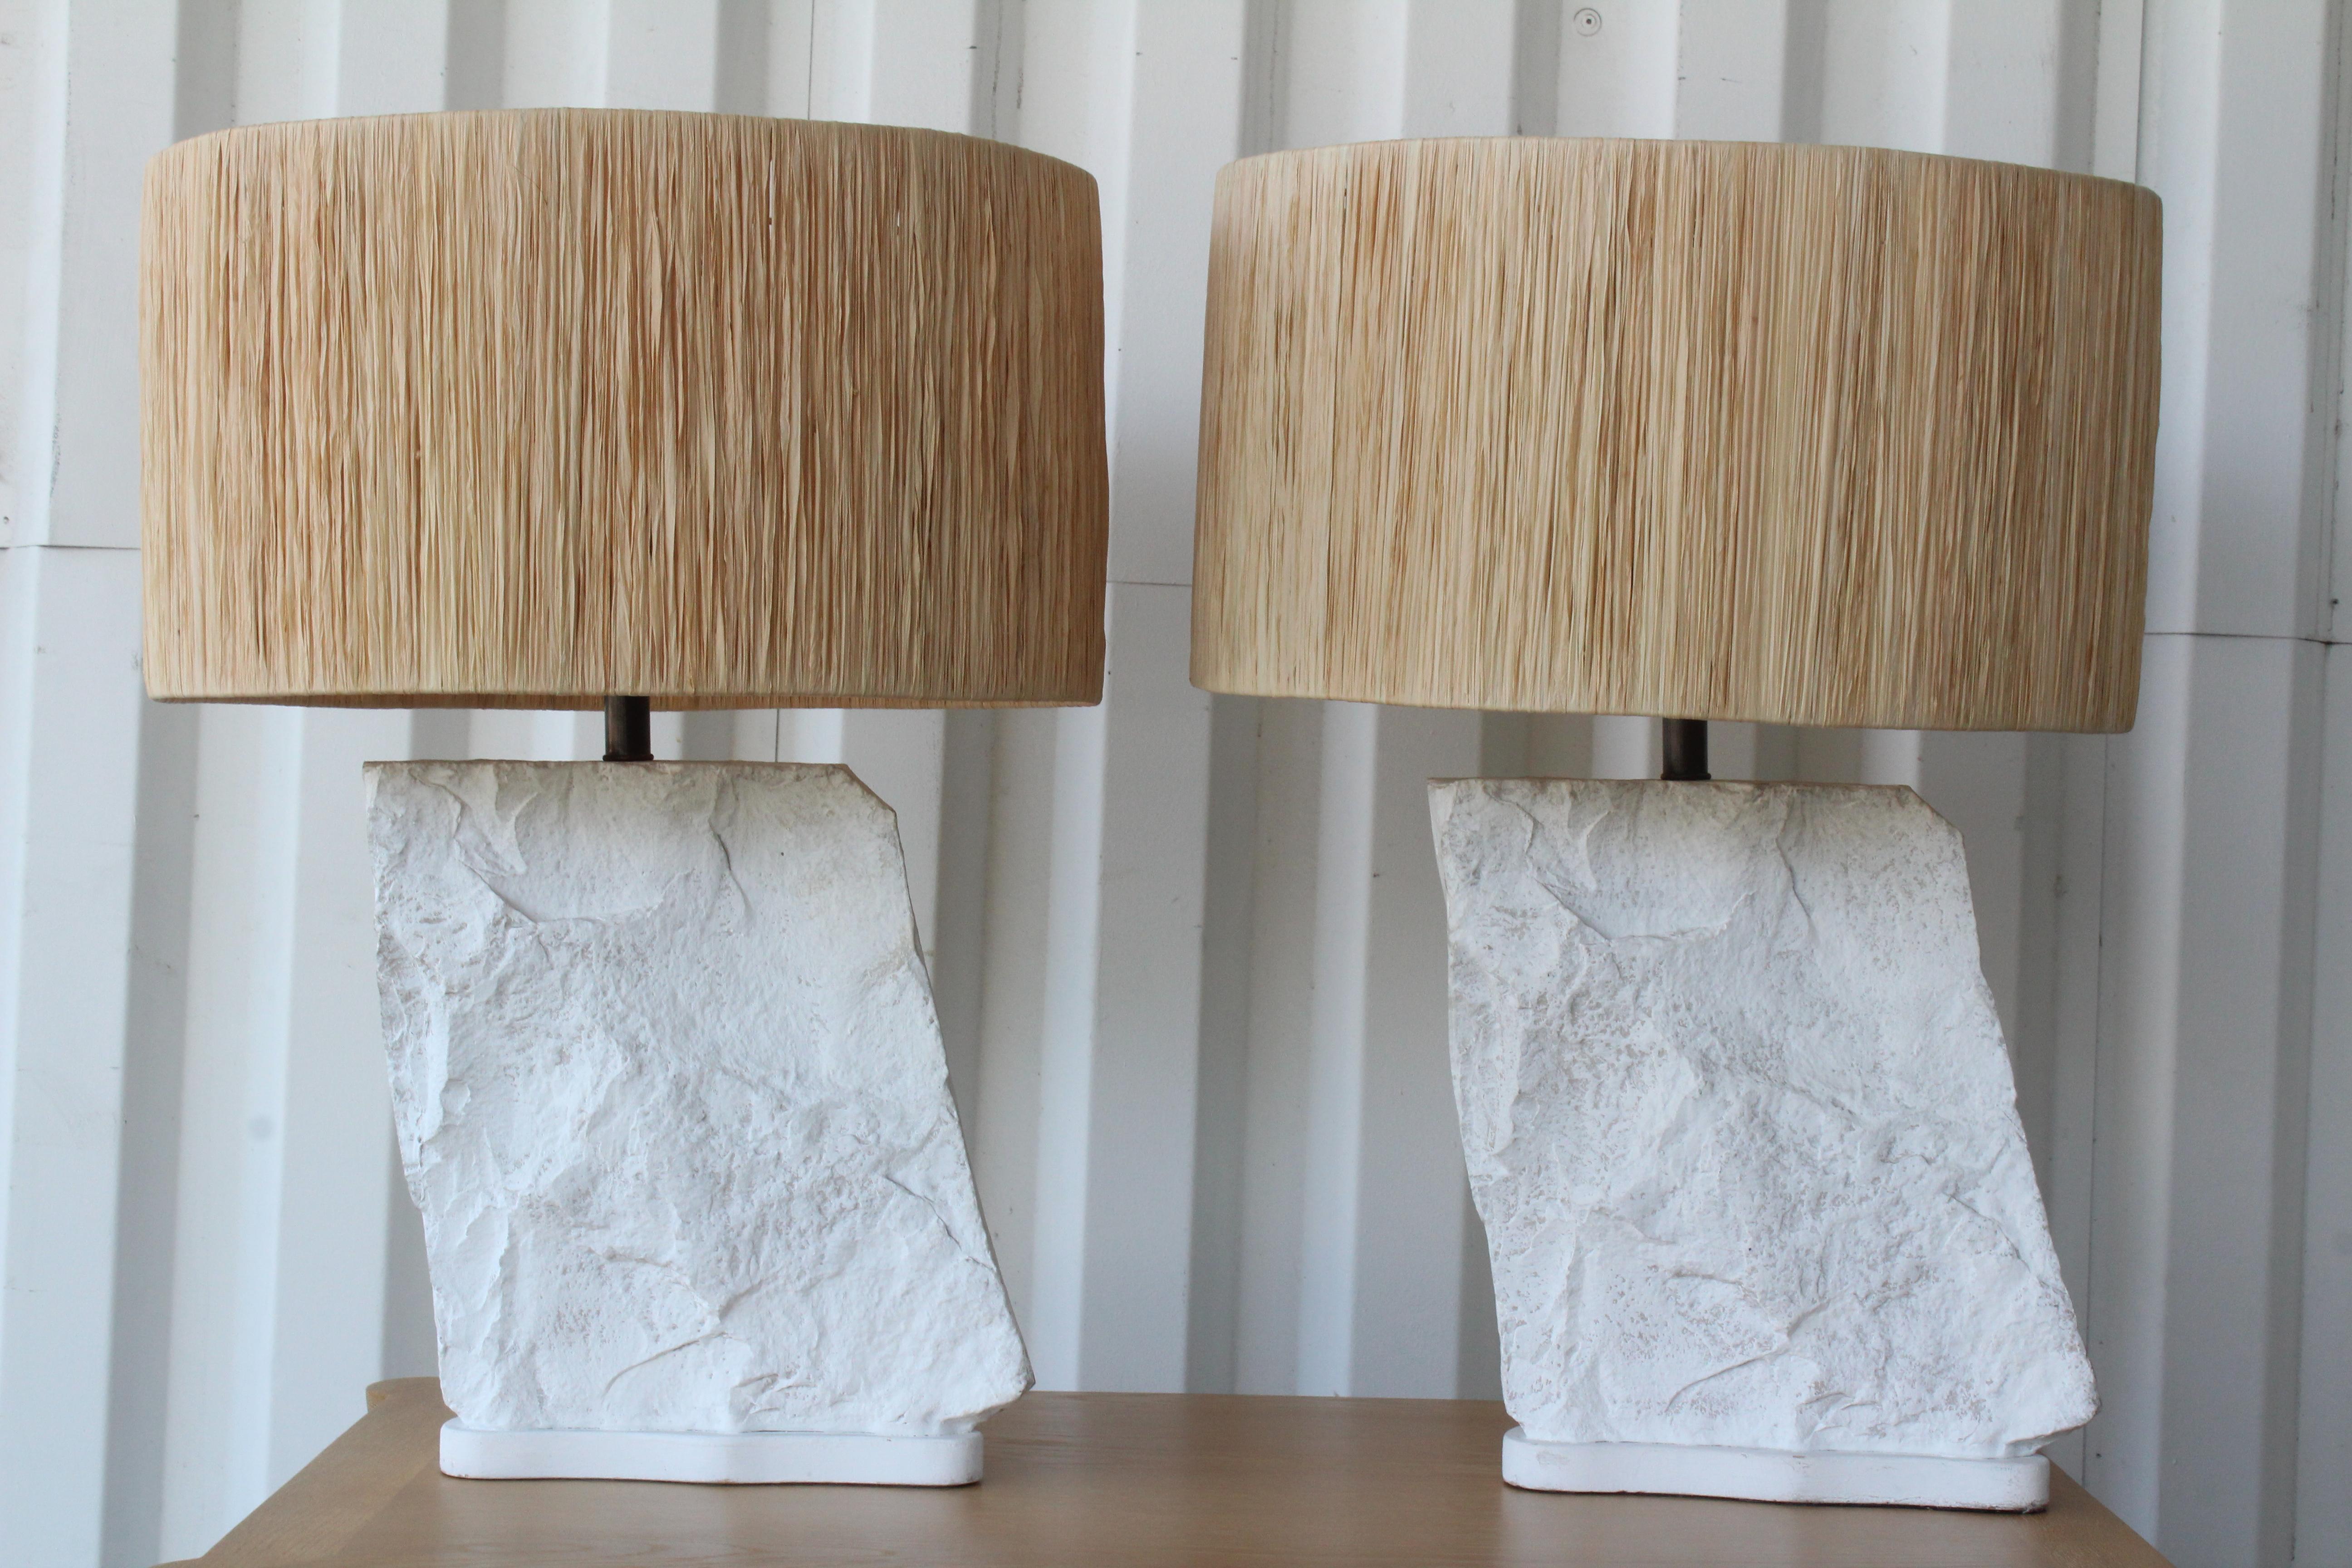 Pair of plaster rock lamps by Sirmos, made in France in the 1970s. The pair have been rewired and include custom made raffia shades. The lamps are 25